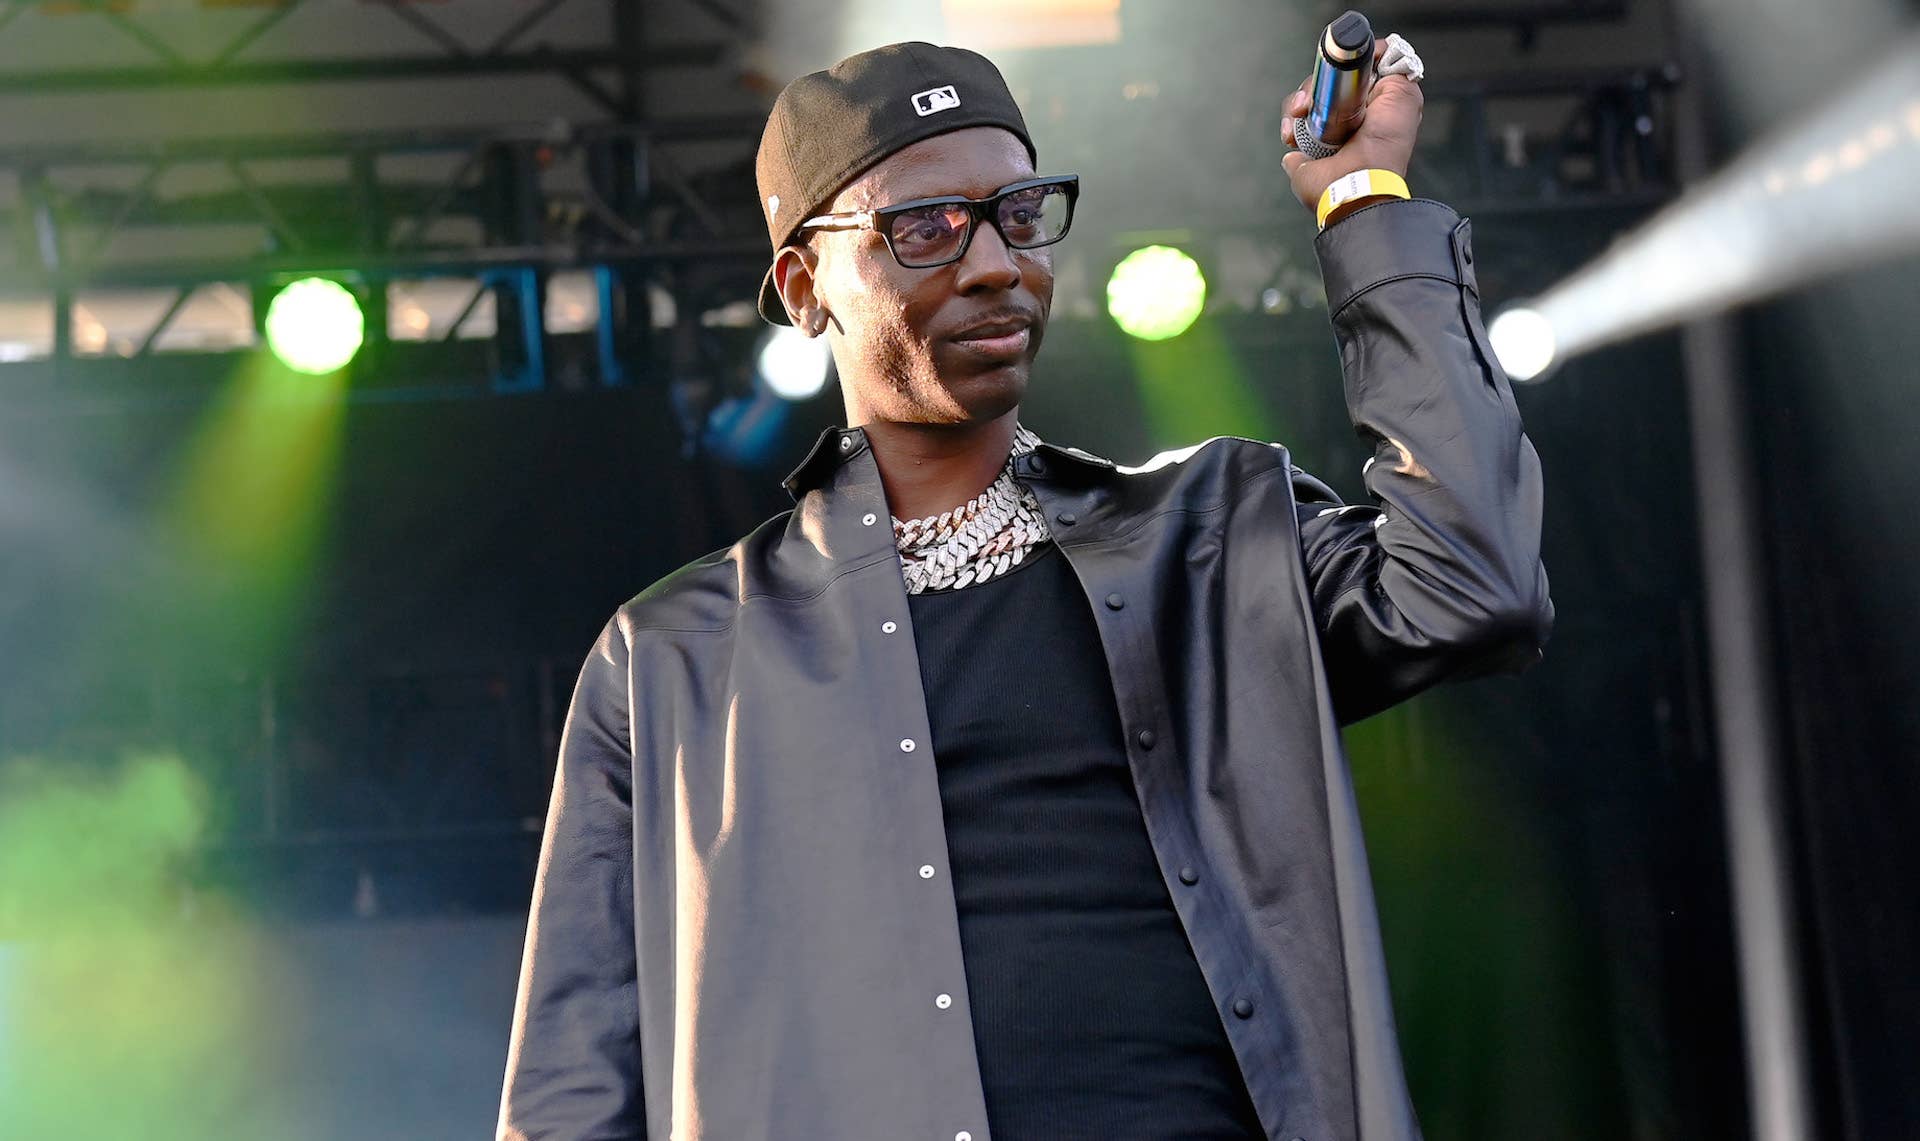 New Trial Date Has Been Announced For Young Dolphâs Alleged Murderers